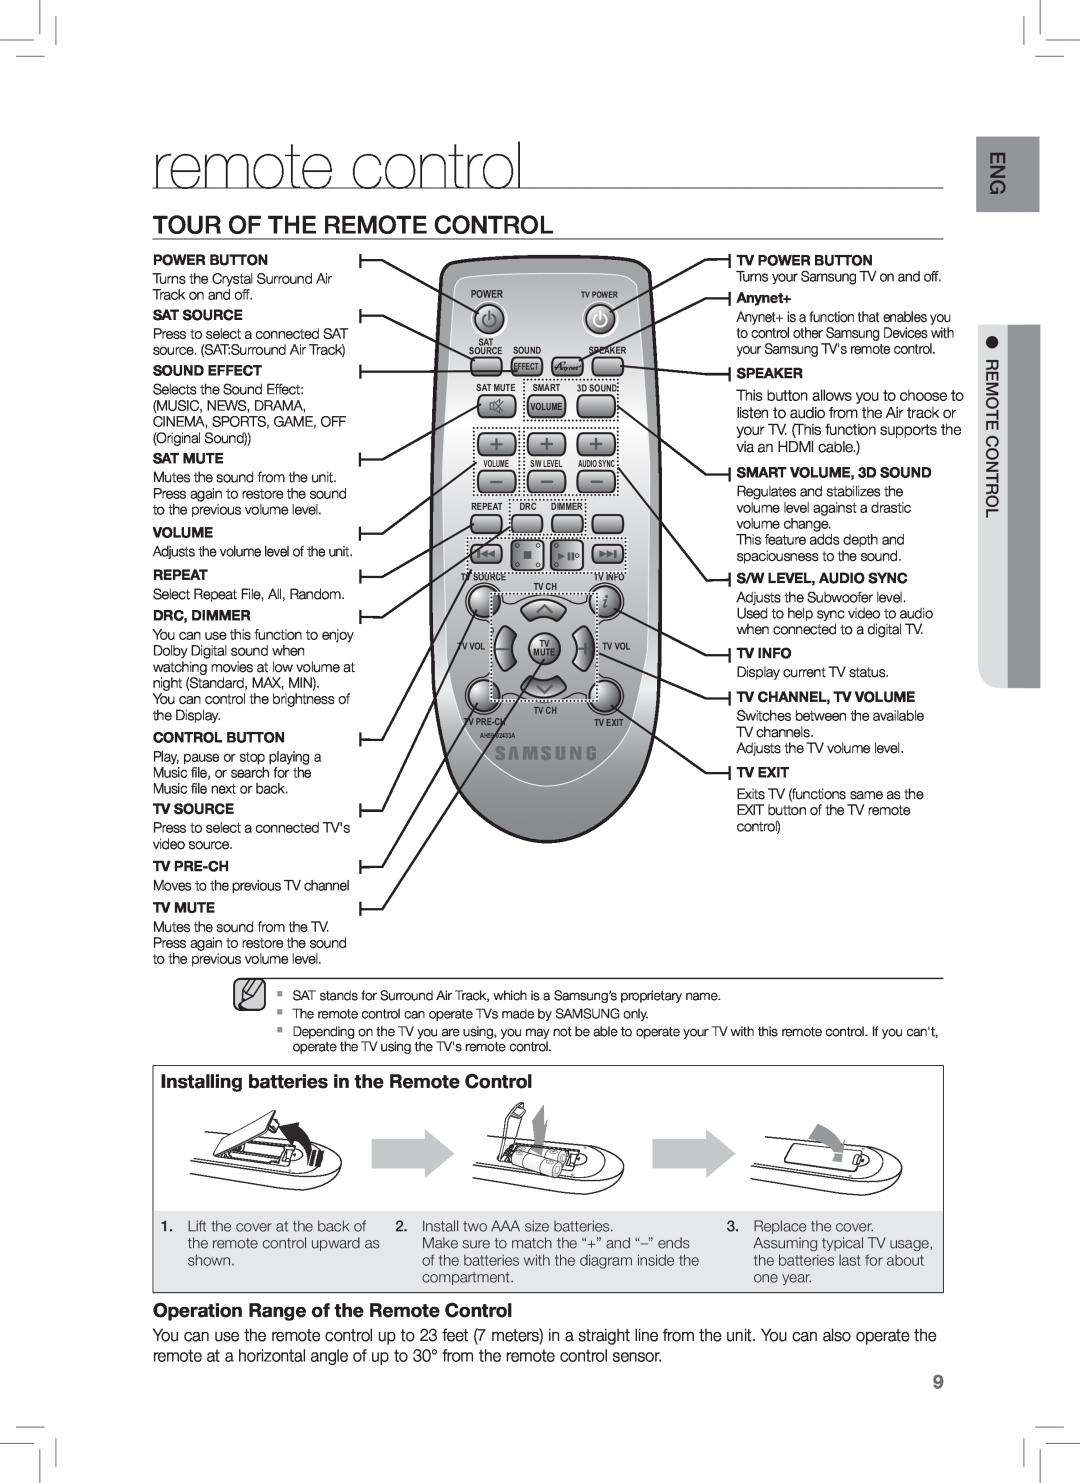 Samsung HW-E350 user manual remote control, Tour Of The Remote Control, Installing batteries in the Remote Control 